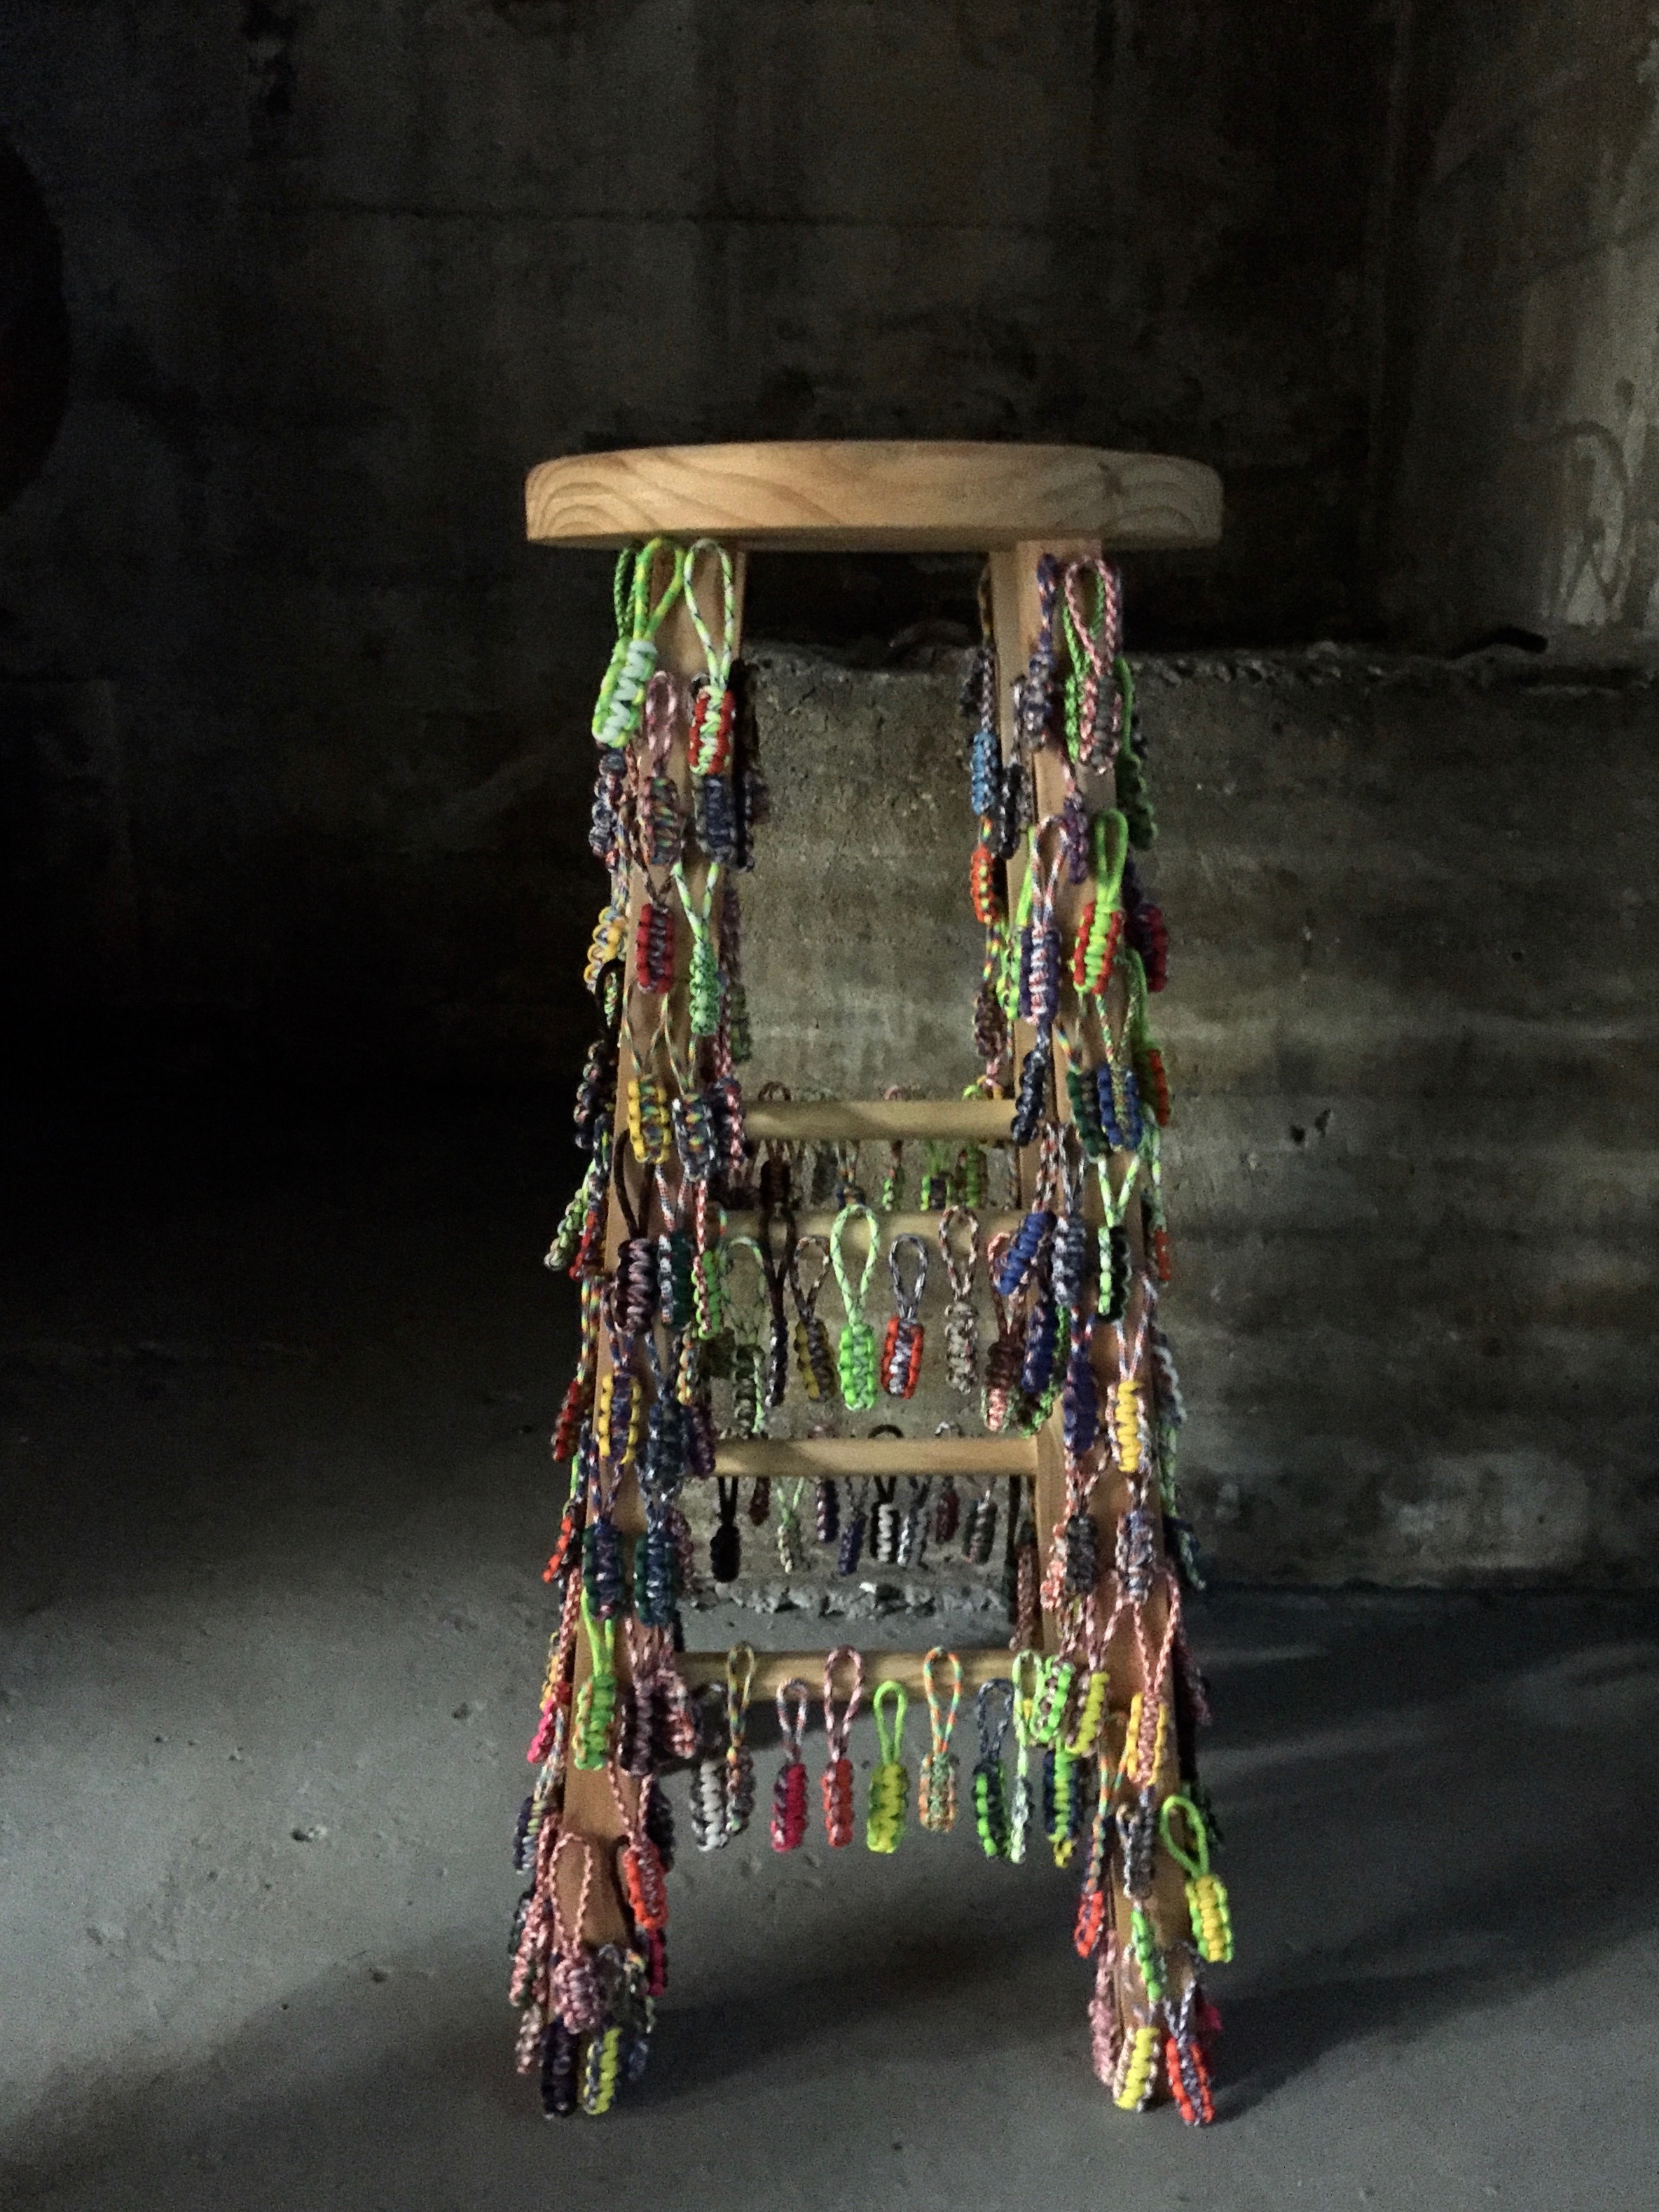 Haynes Riley, Pedestal (George), 2016, Zipper Pulls from Cam's Custom Paracords, wood, nails, 13" x 30" x 13", from the An Attitude You Can Wear exhibition, Tops Gallery (June- August 2016)